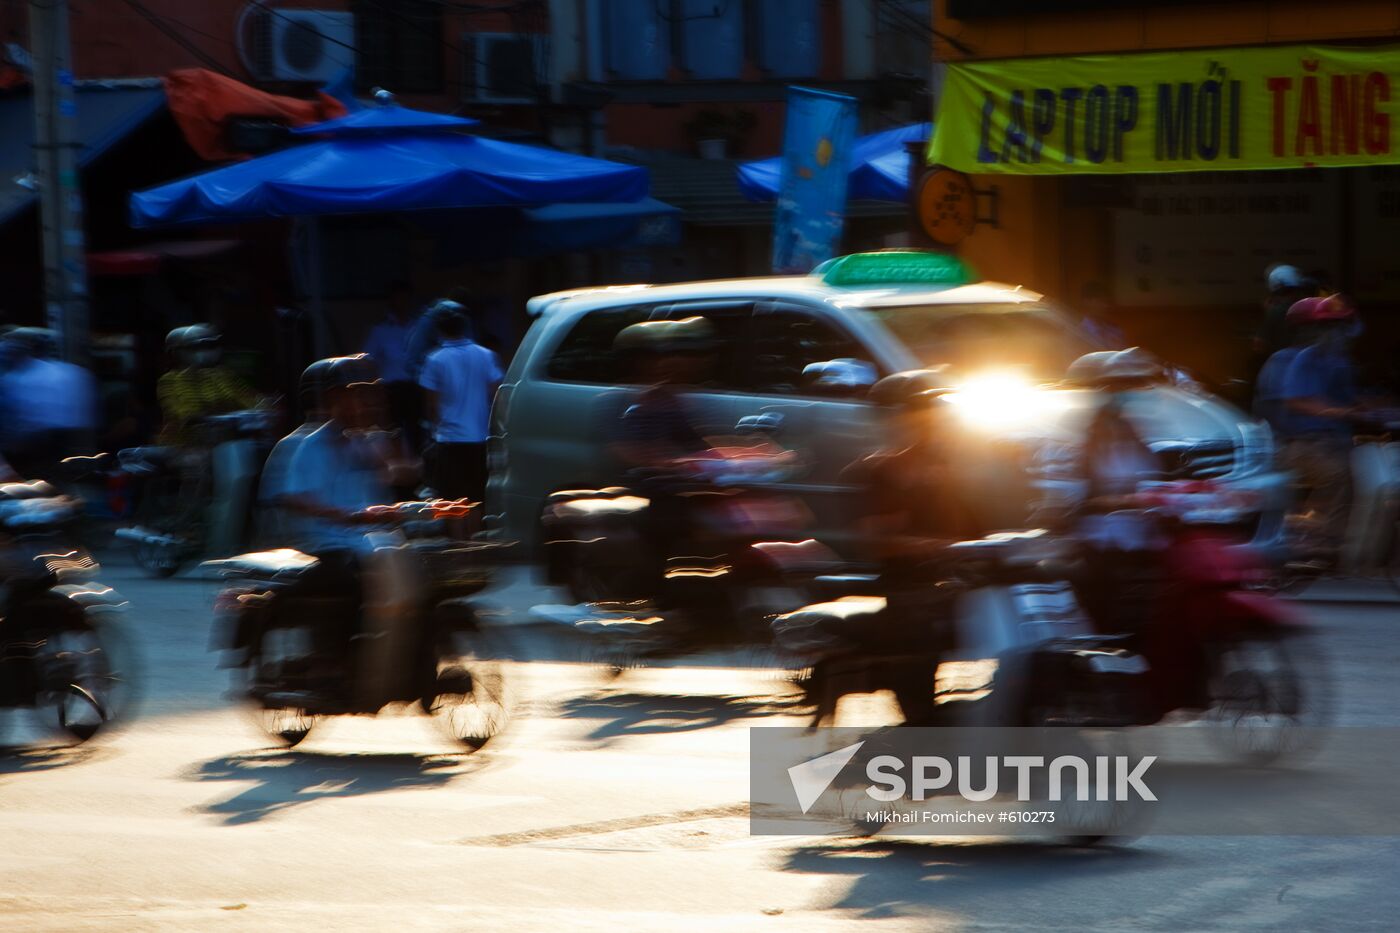 In a street of Ho Chi Minh City